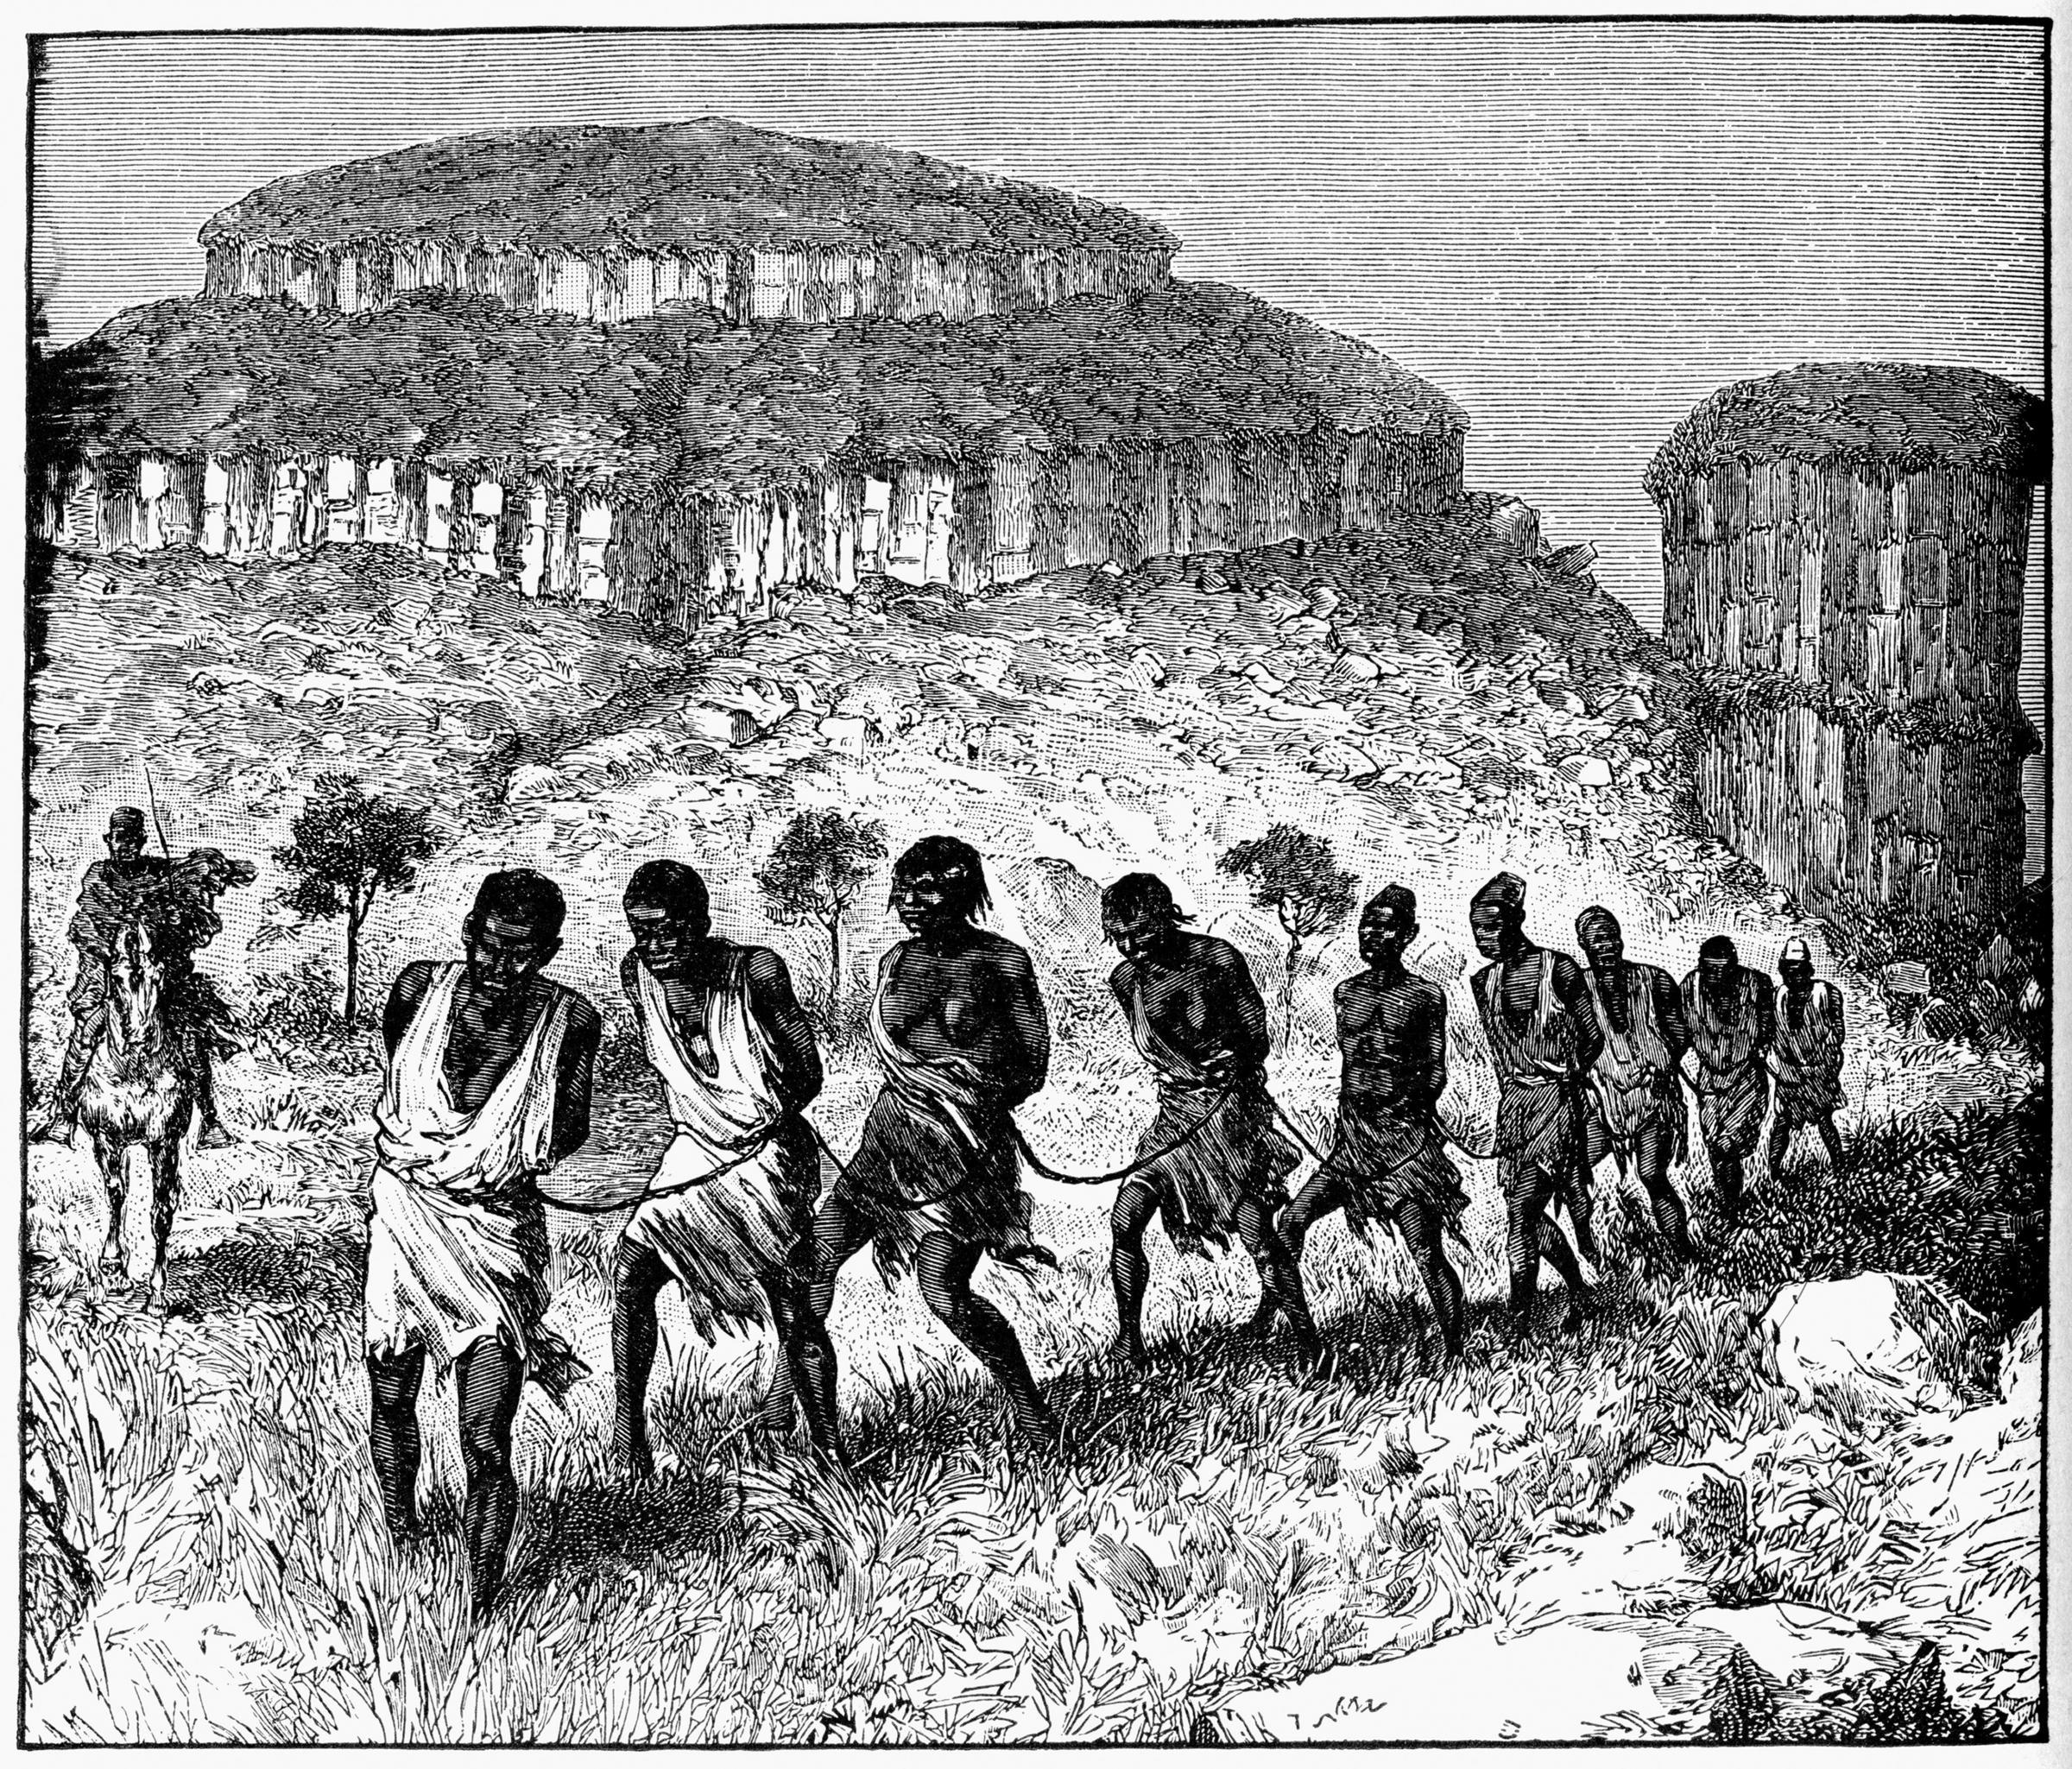 Engraving depicts a forced march of men and women on their way to slave ships, Africa, 1820s. (Photo by Interim Archives/Getty Images).